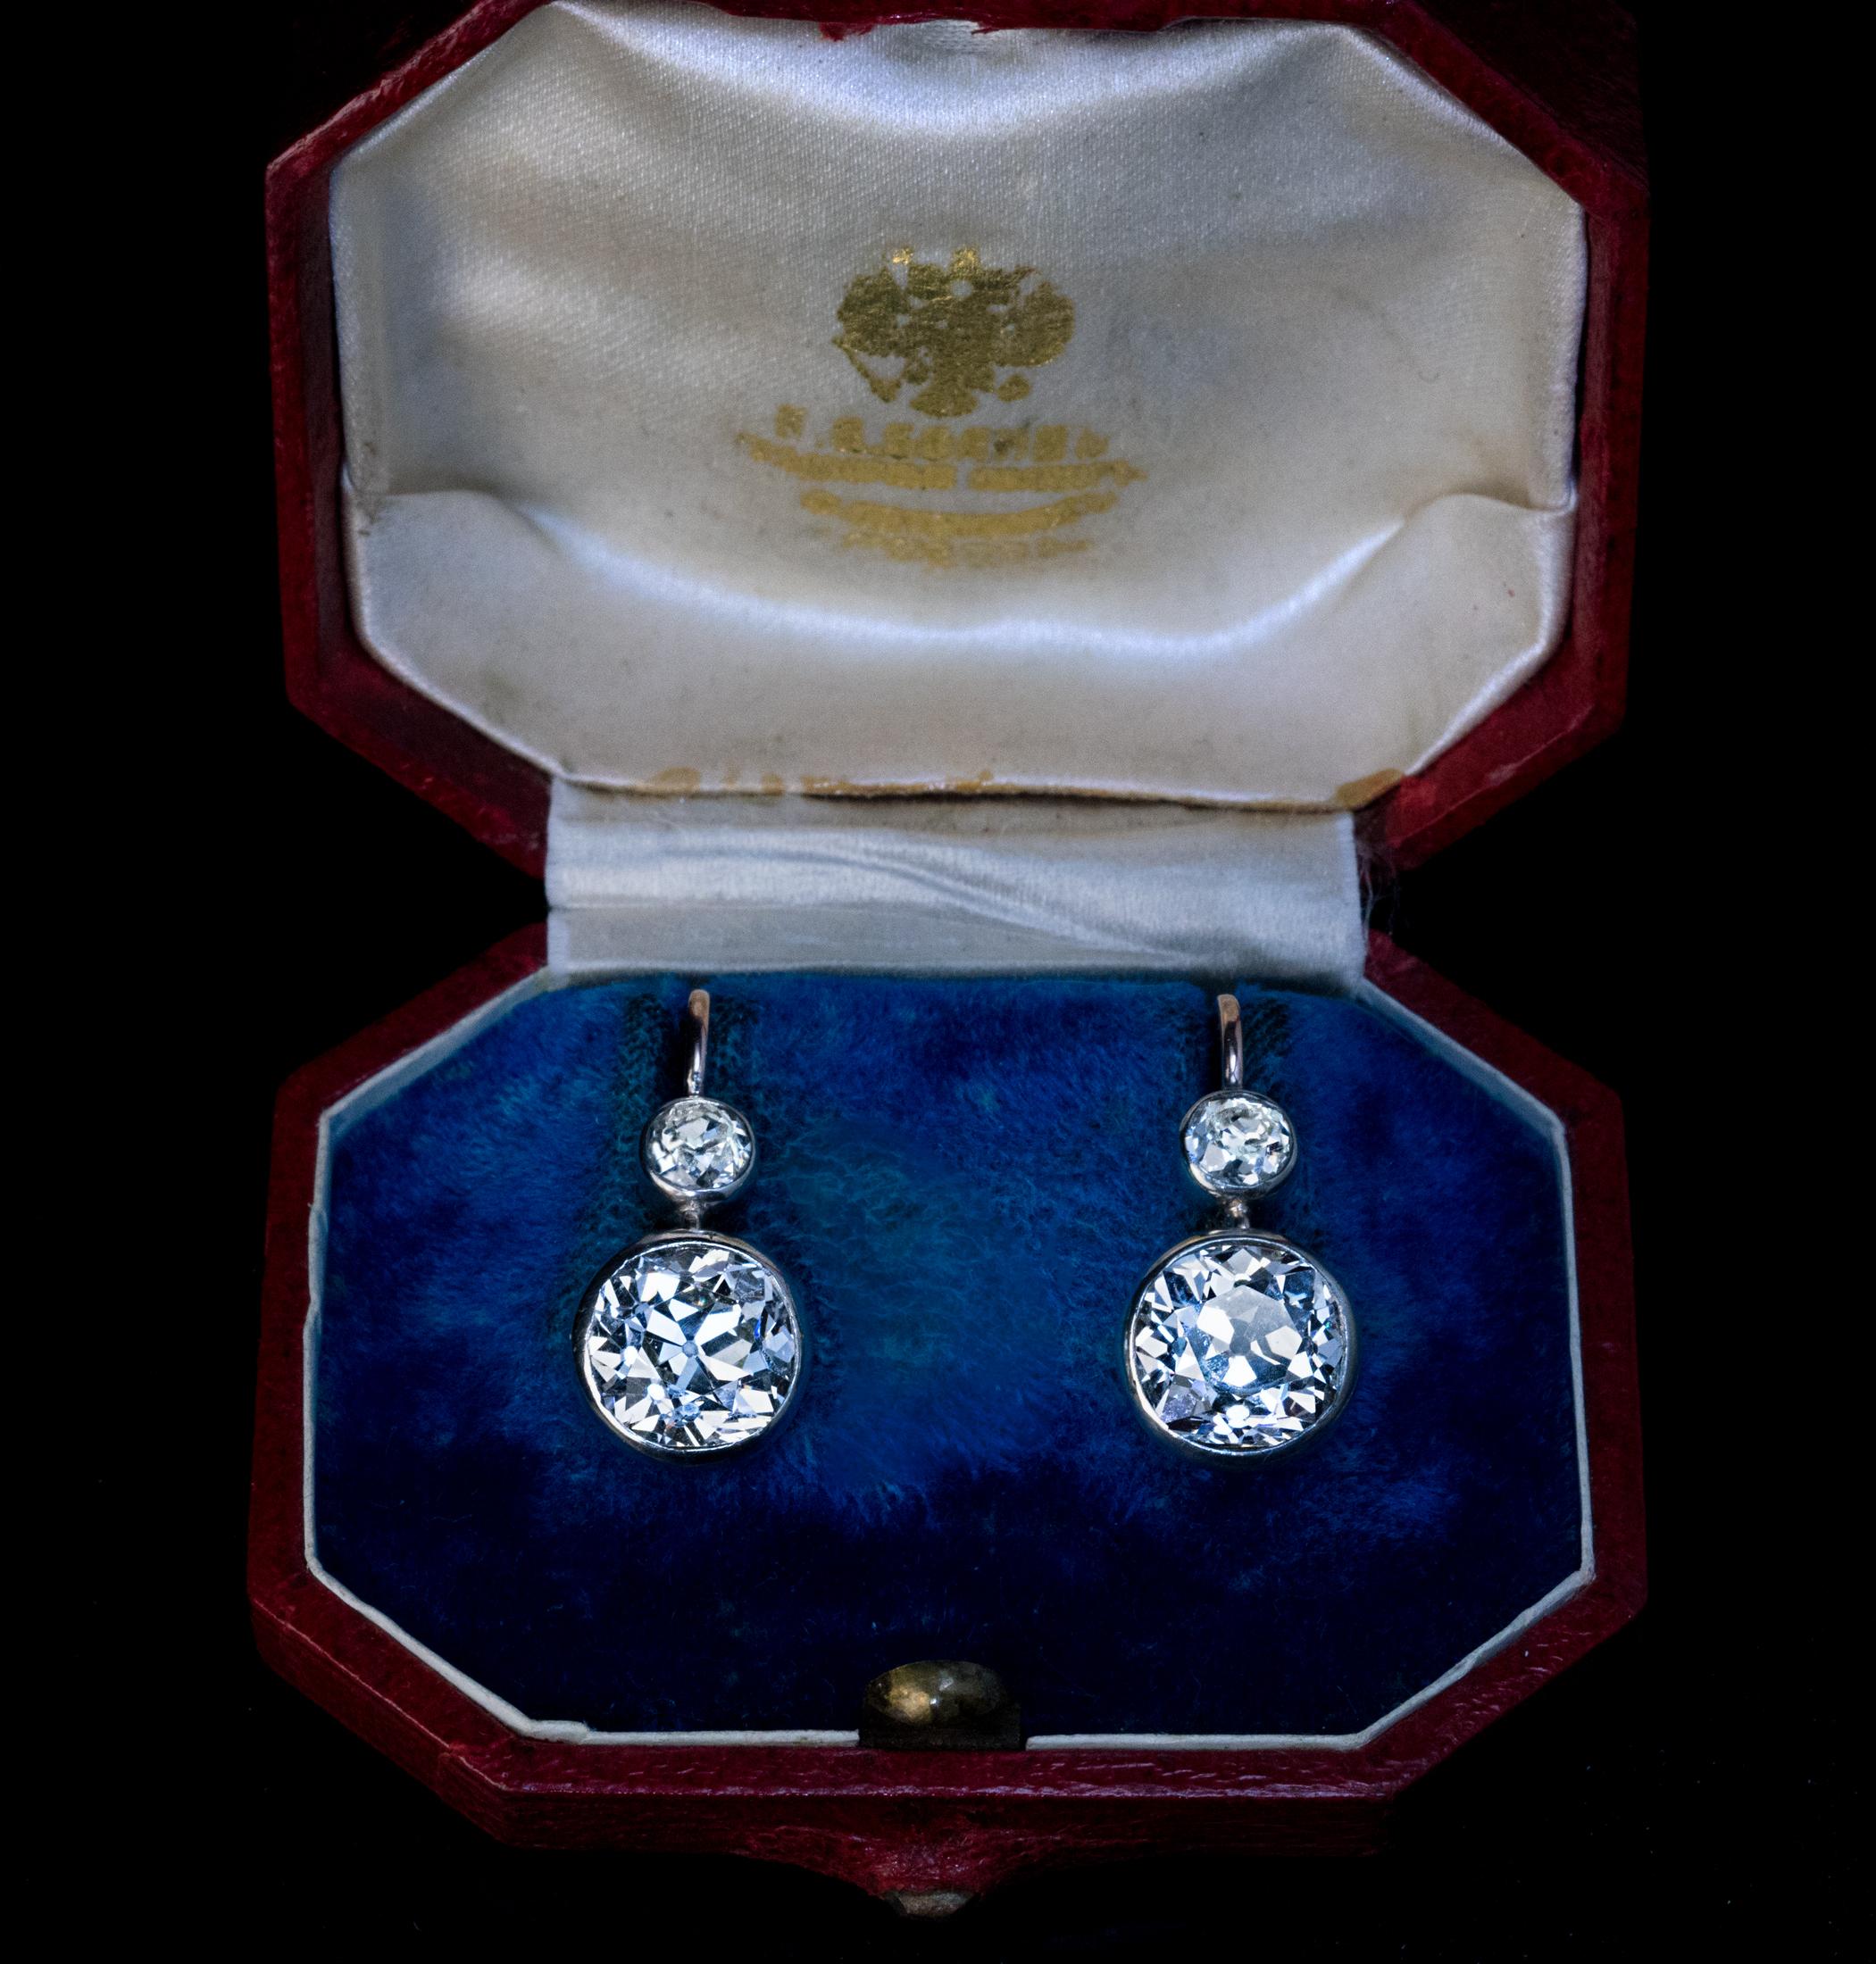 Circa 1900
These rare antique diamond earrings are handcrafted in silver-topped 14K gold (front -silver, back – gold). The earrings feature two clean and very sparkly large old mine cut diamonds: approximately 3.60 carats and 3.43 carats (VVS2 and